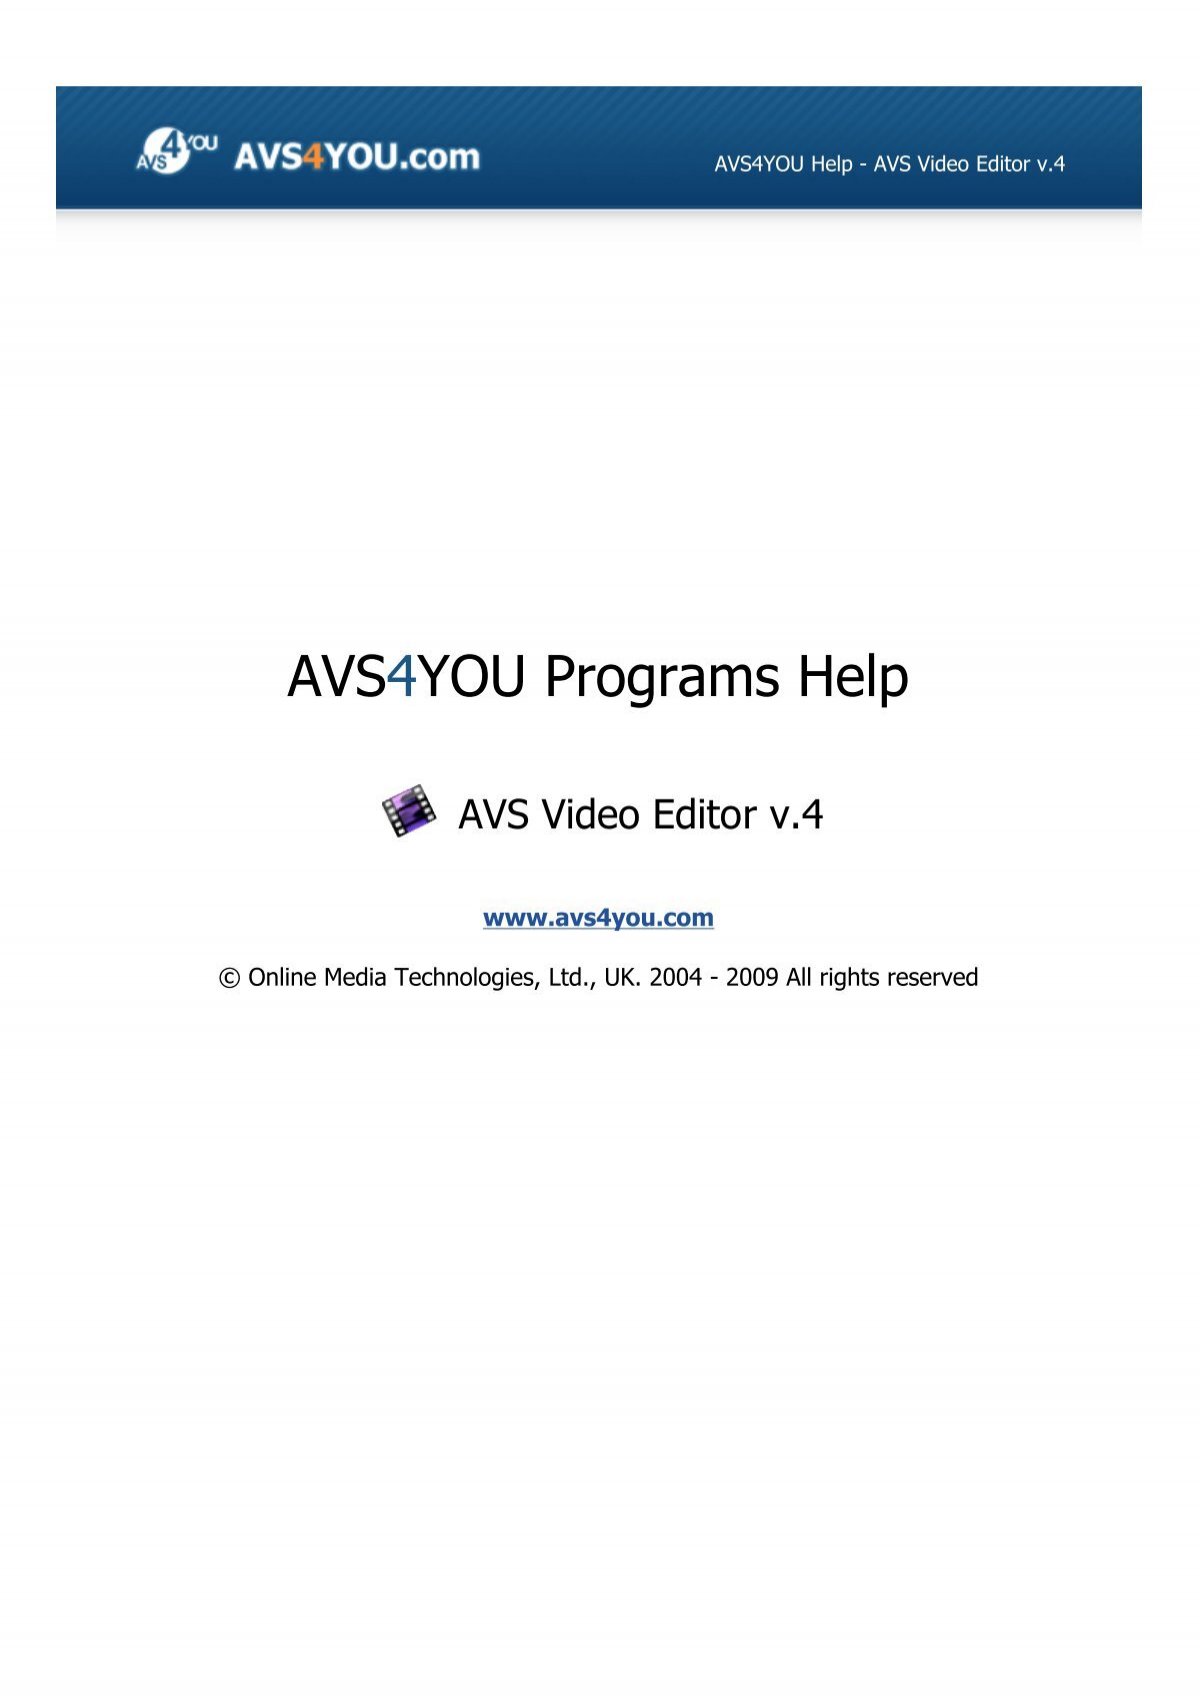 Avs Video Editor Help In Pdf Download Avs4you Online Help - 25 roblox music codes id s 2019 2020 working 27 183 mb